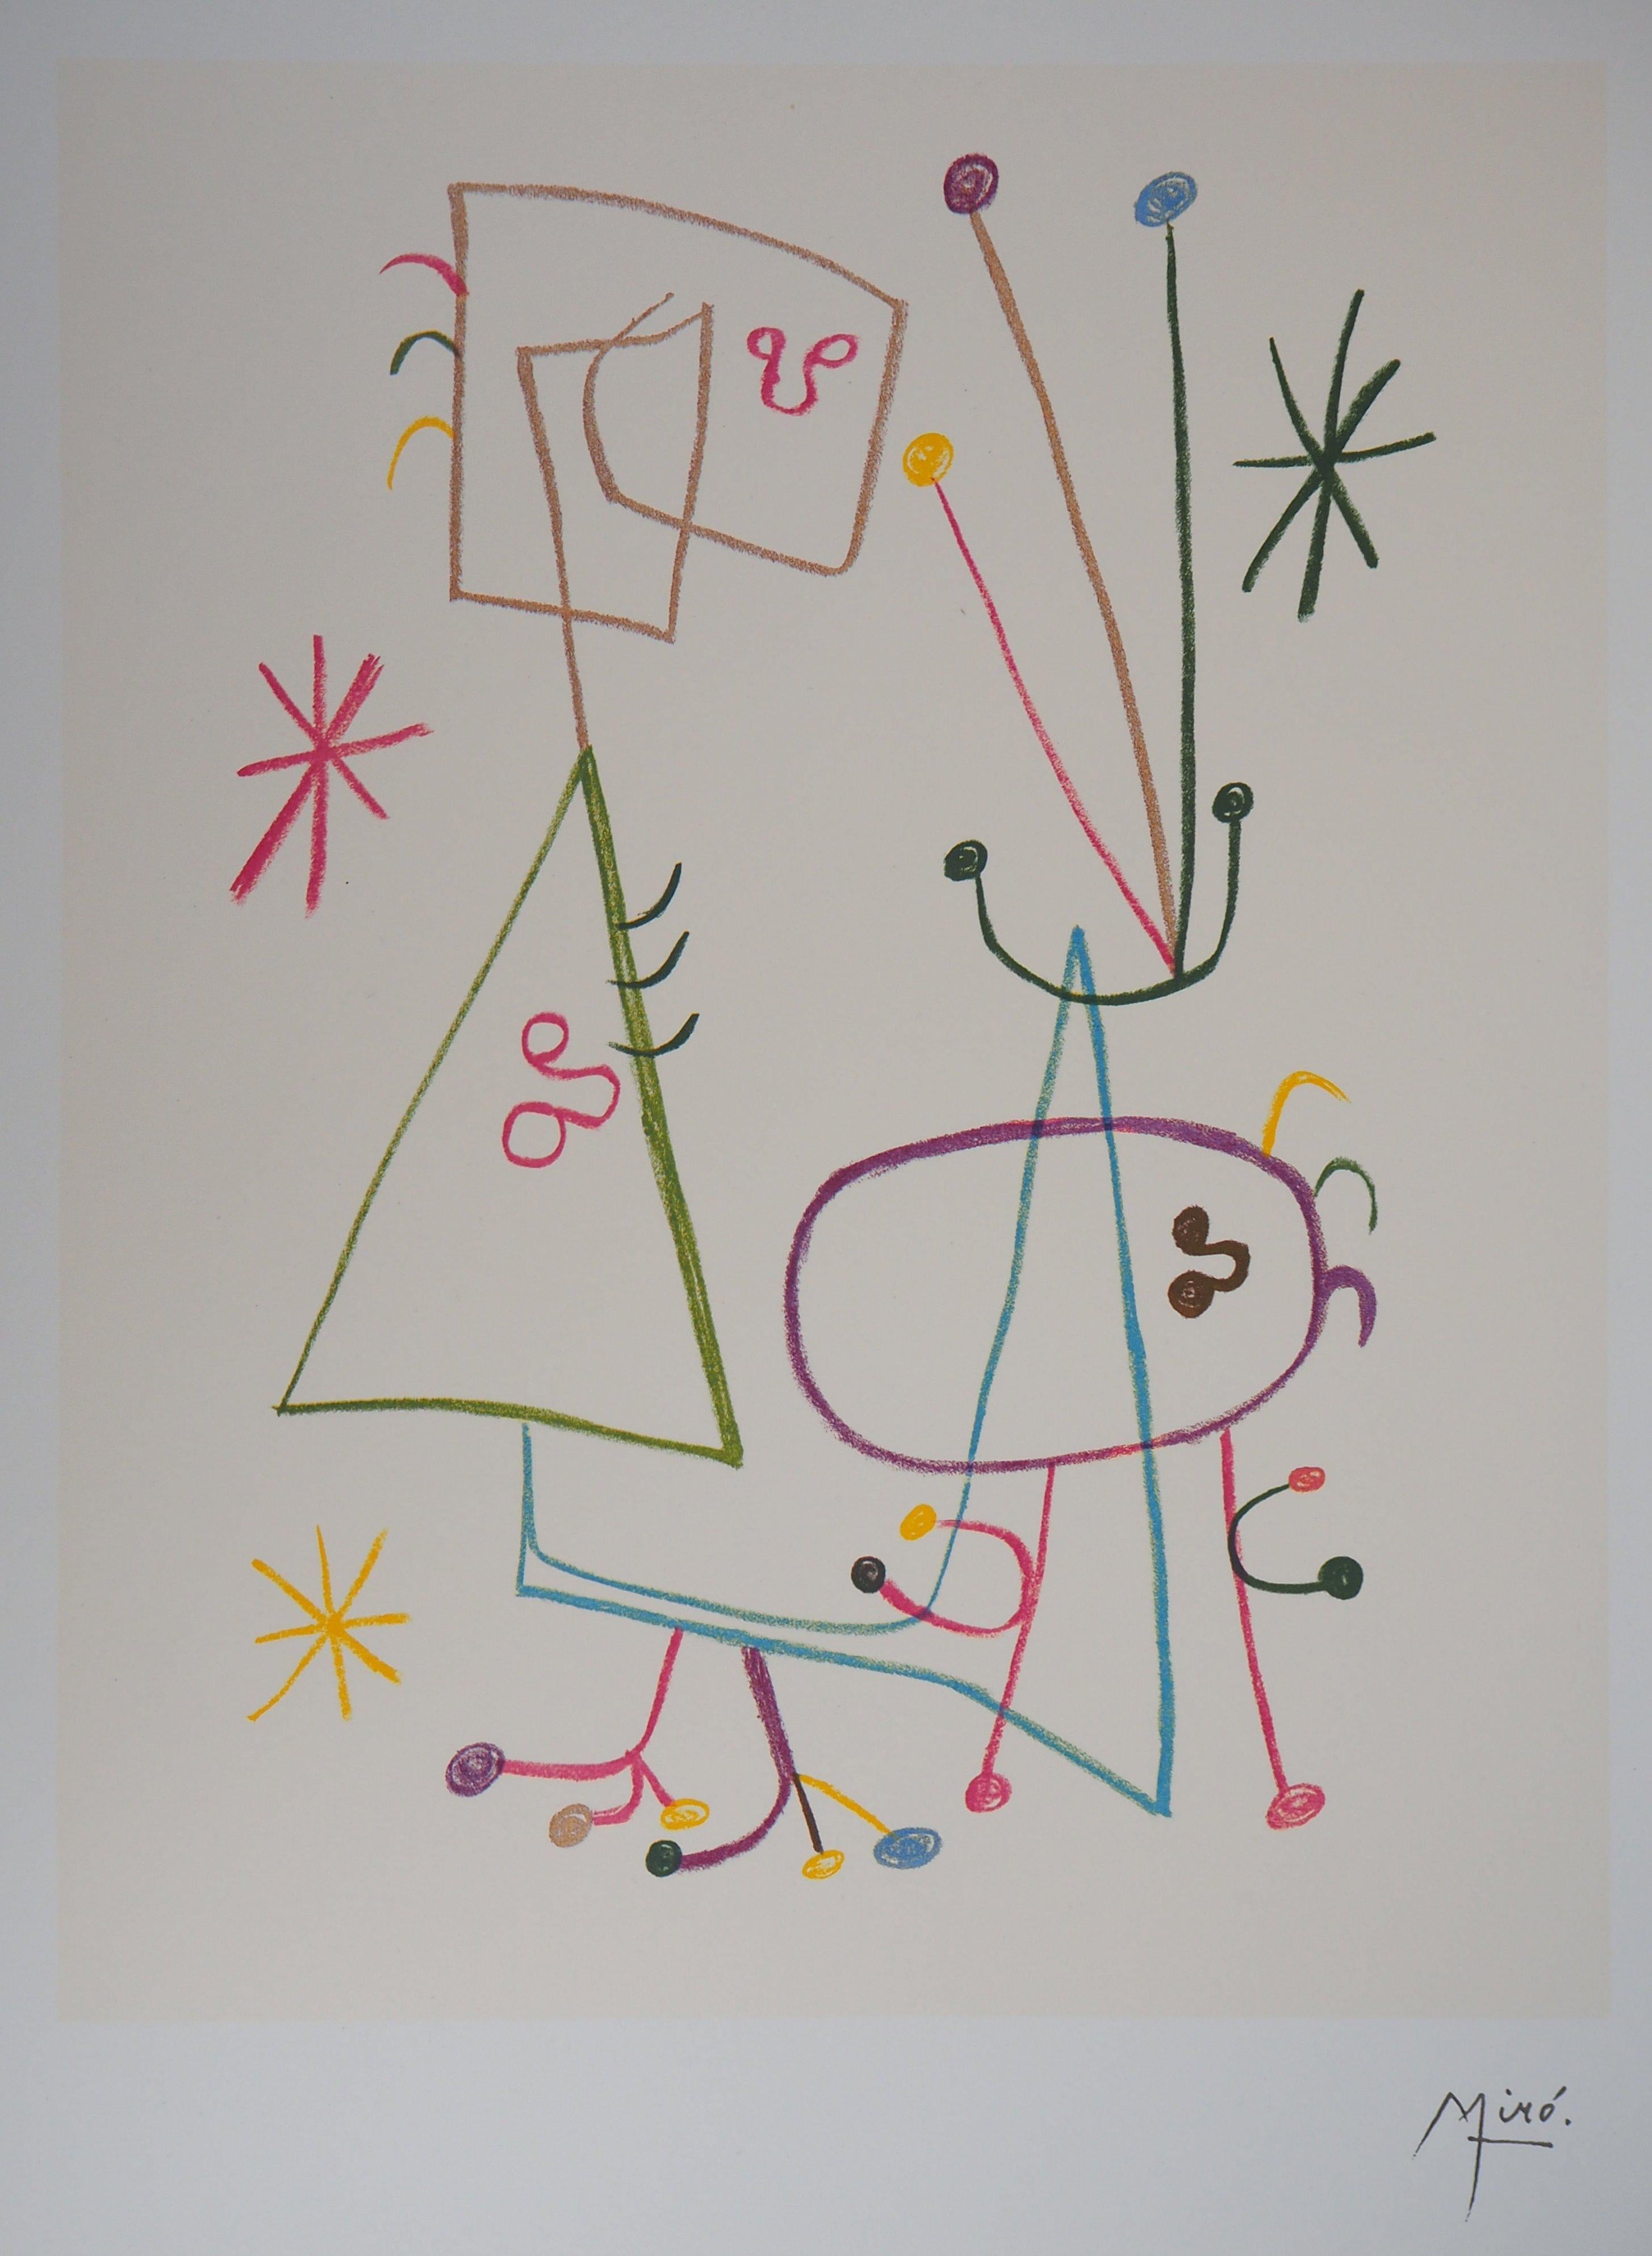 Family in a Garden with Stars - Lithograph - Print by (after) Joan Miró